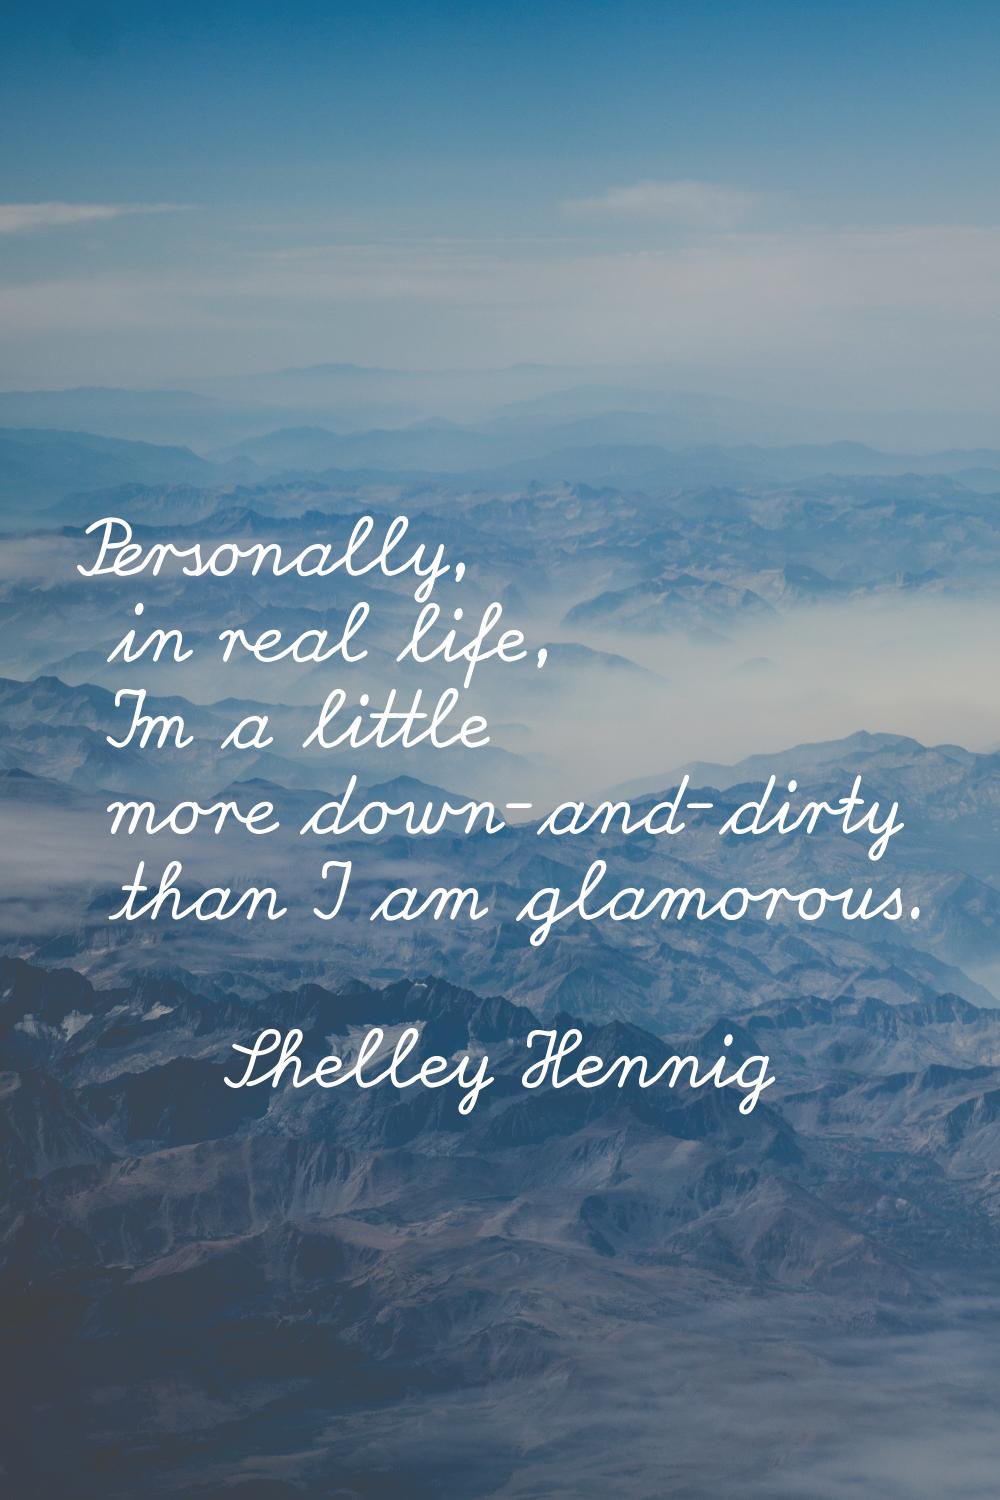 Personally, in real life, I'm a little more down-and-dirty than I am glamorous.